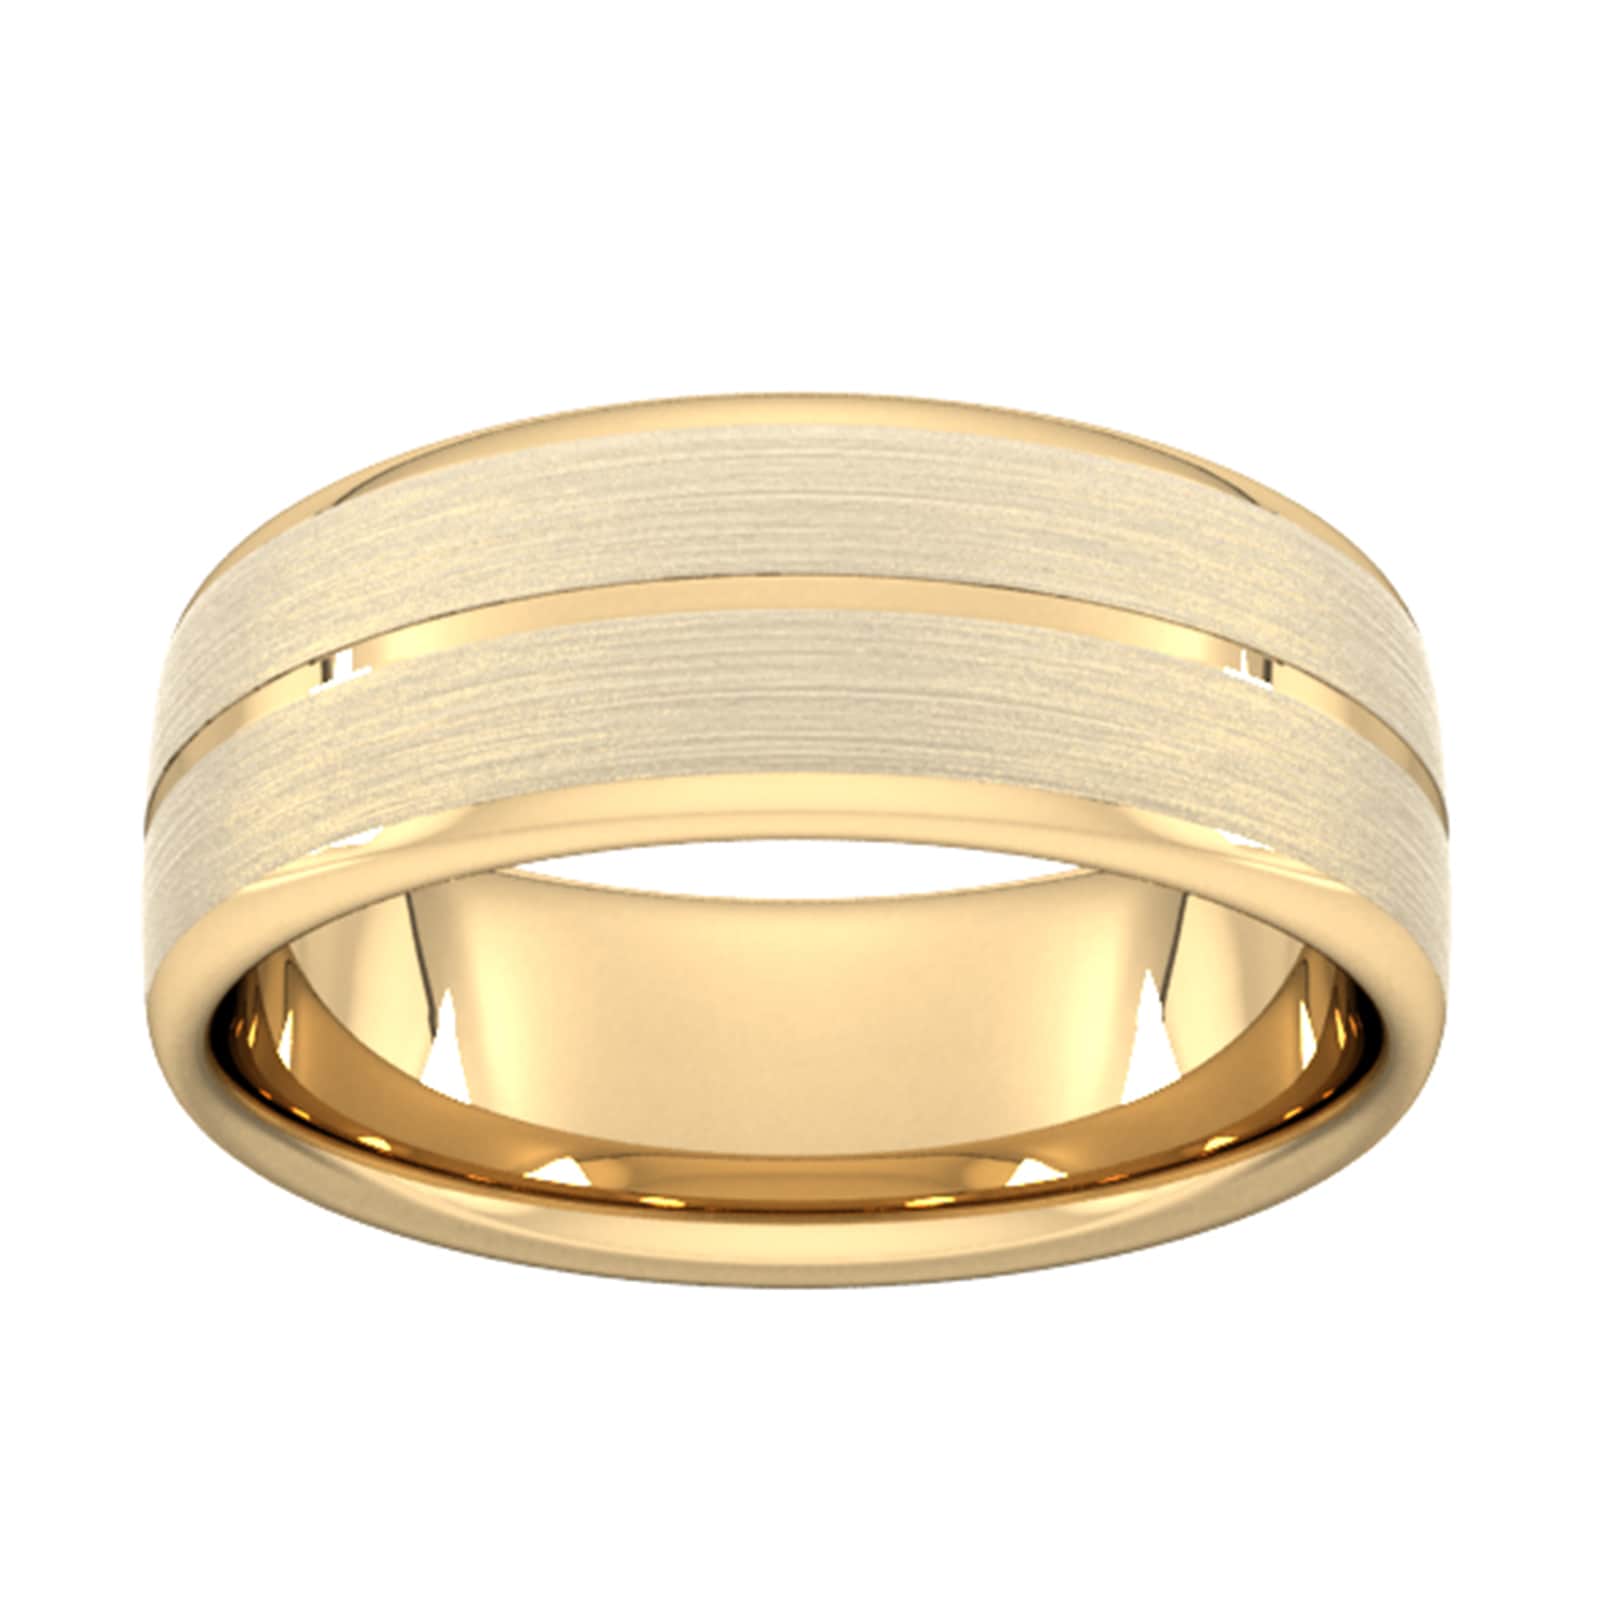 8mm Slight Court Heavy Centre Groove With Chamfered Edge Wedding Ring In 18 Carat Yellow Gold - Ring Size H